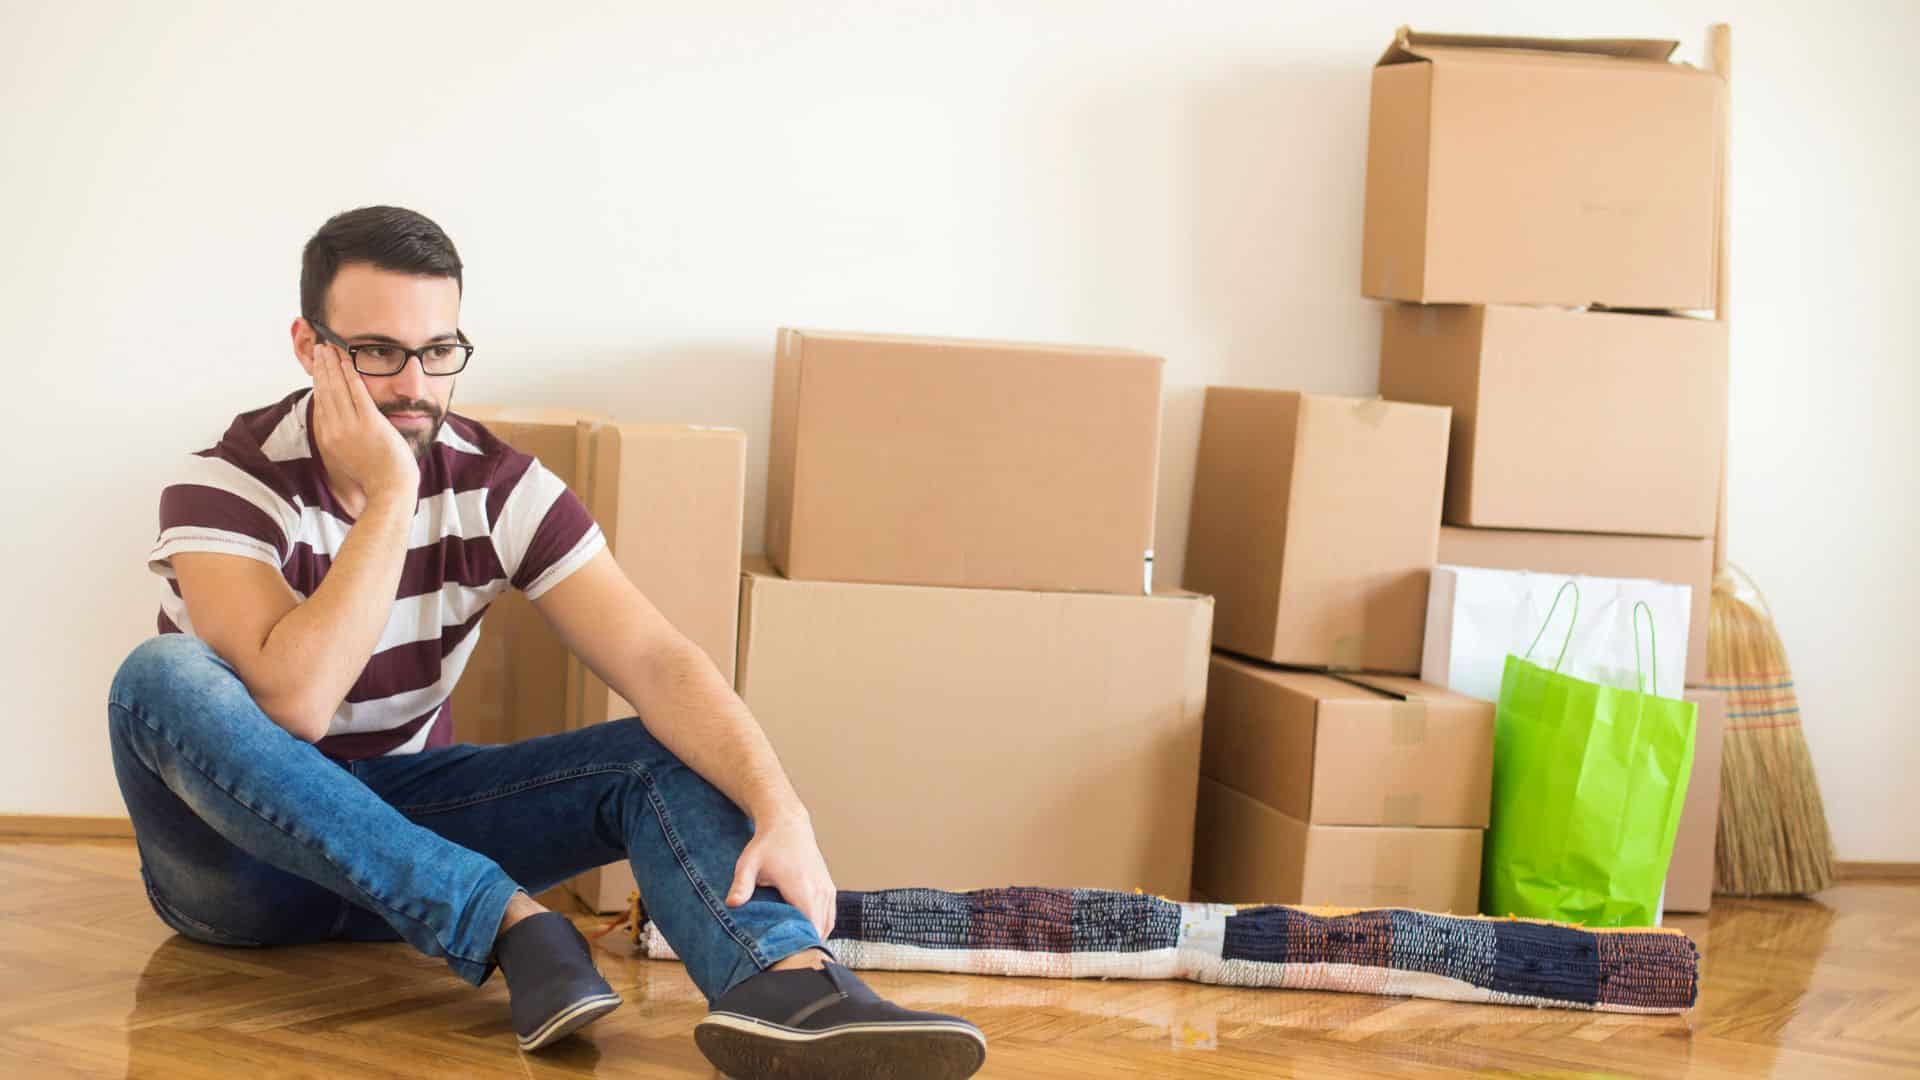 psychological effects of moving house